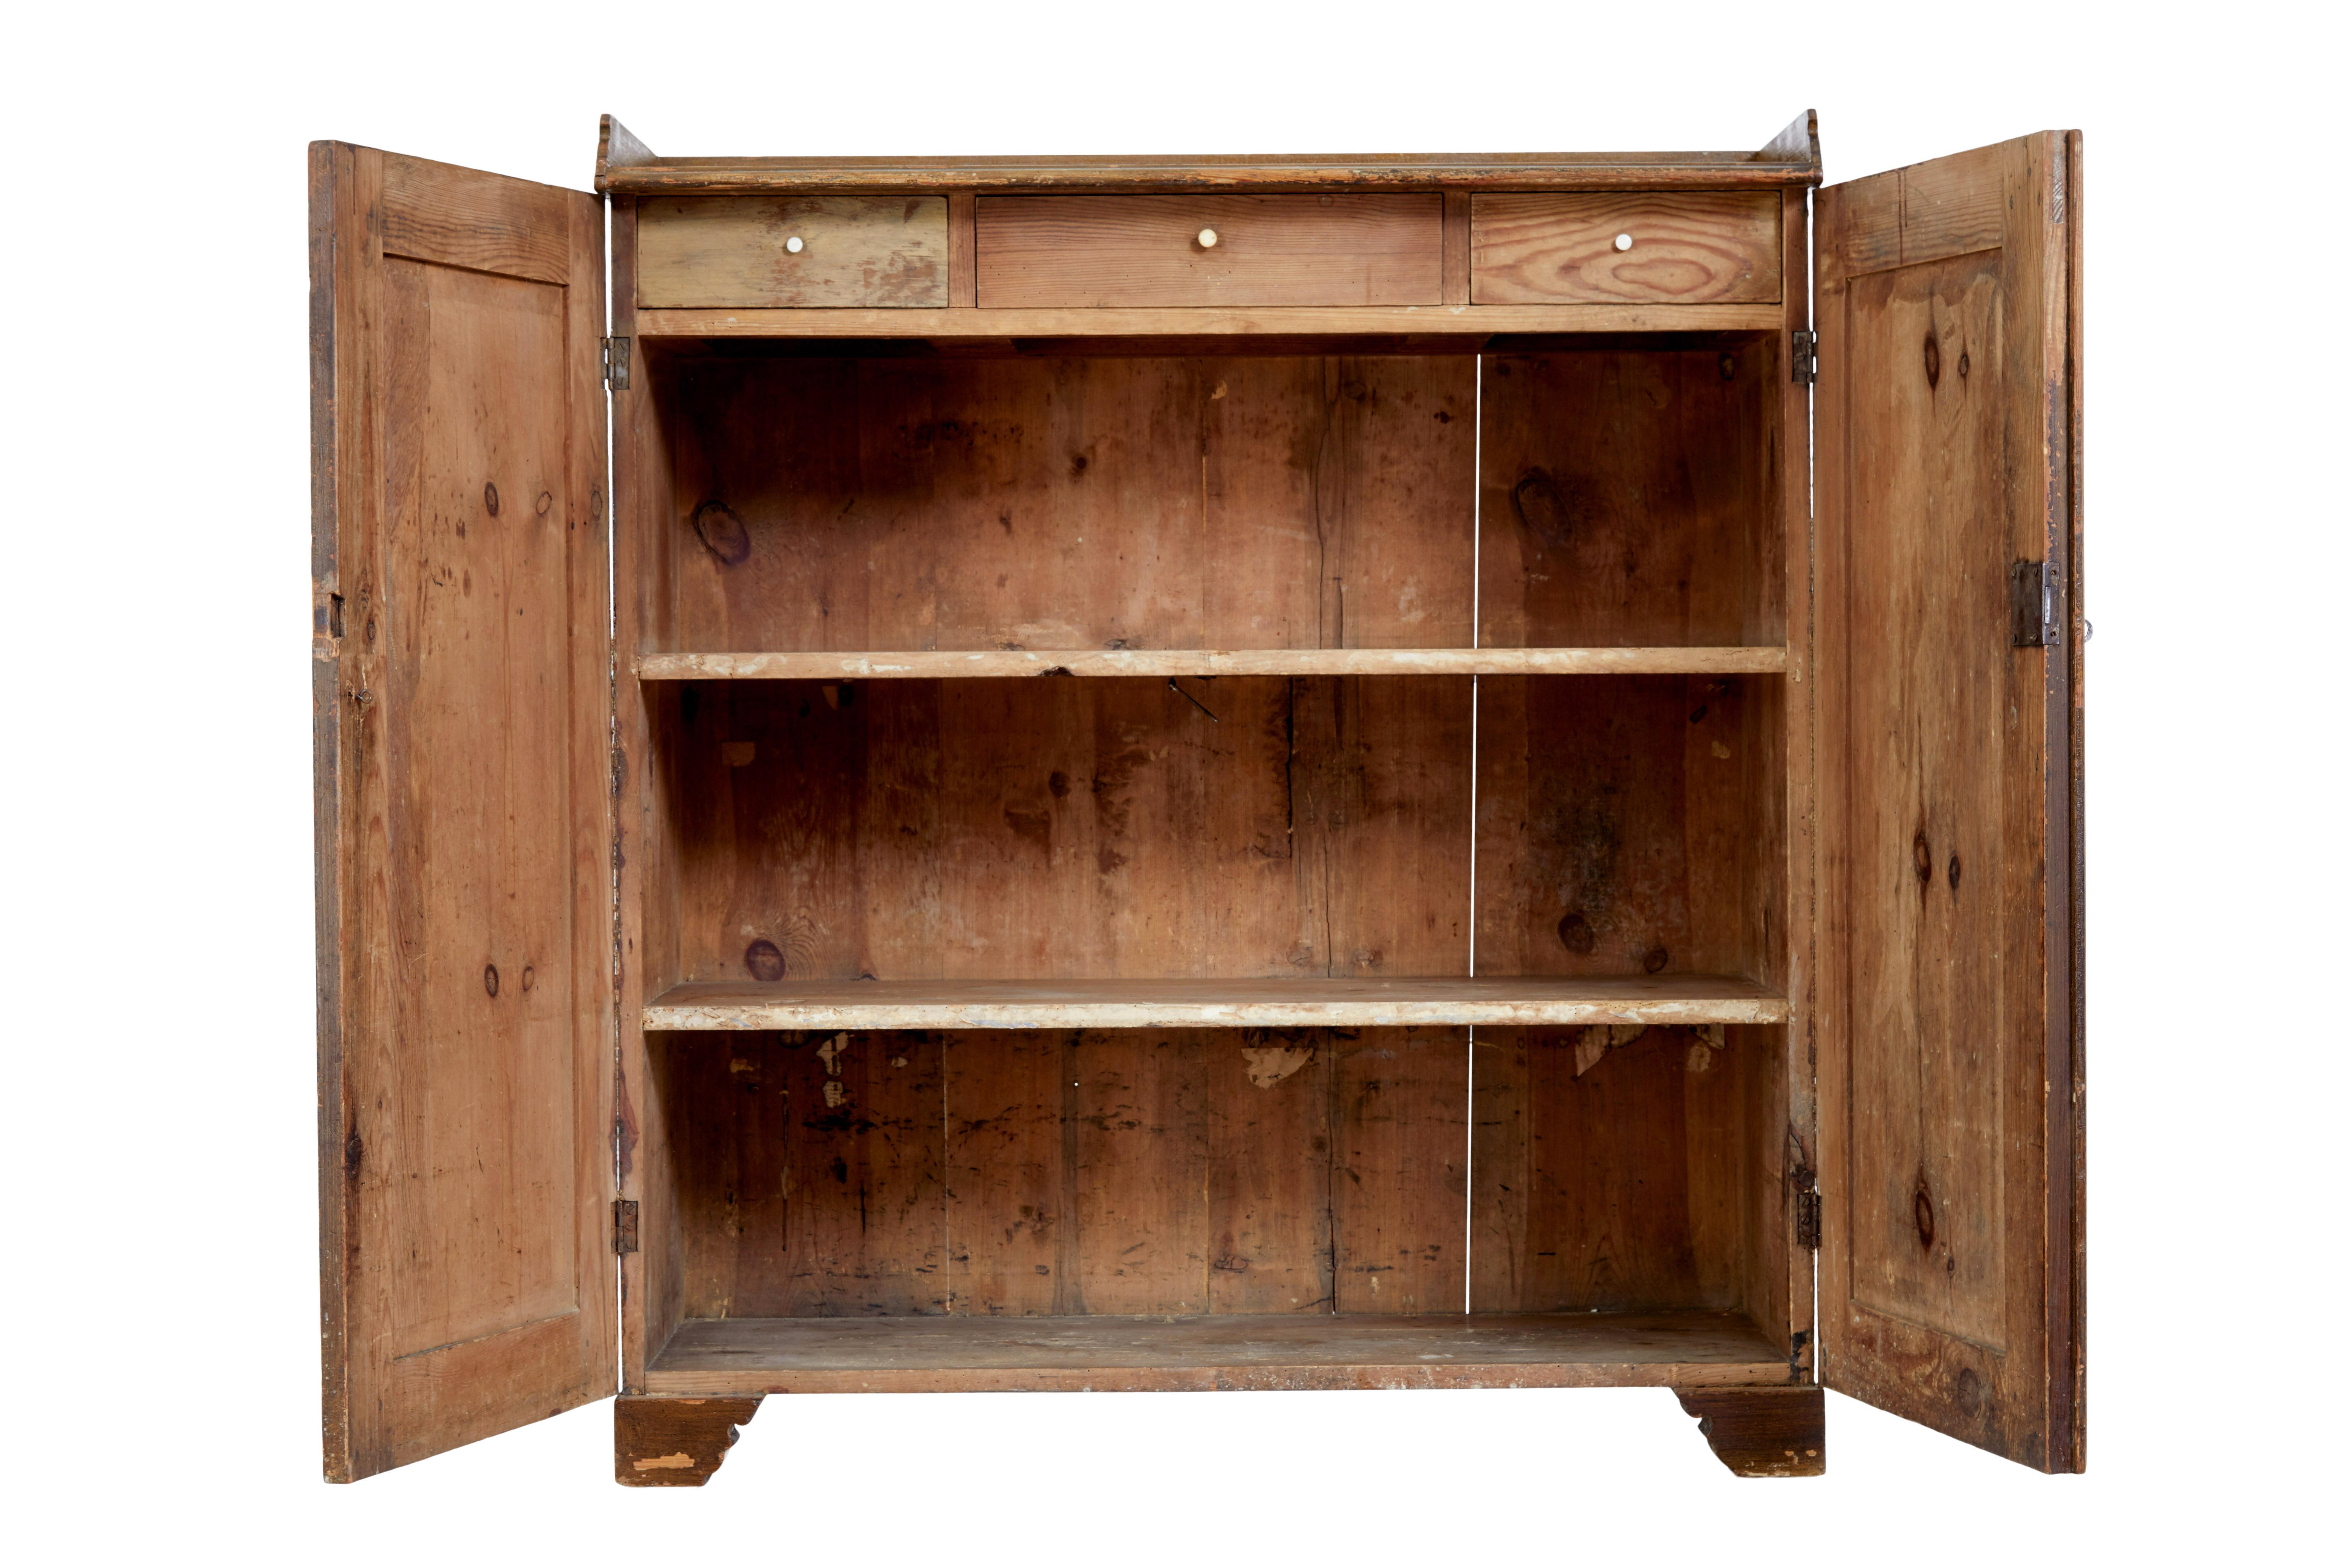 Swedish 19th century rustic painted pine cupboard circa 1860.

Good quality cupboard which could work in the kitchen or equally as a linen cupboard.

Made from pine this piece was hand painted to simulate walnut, which had been done to a very high